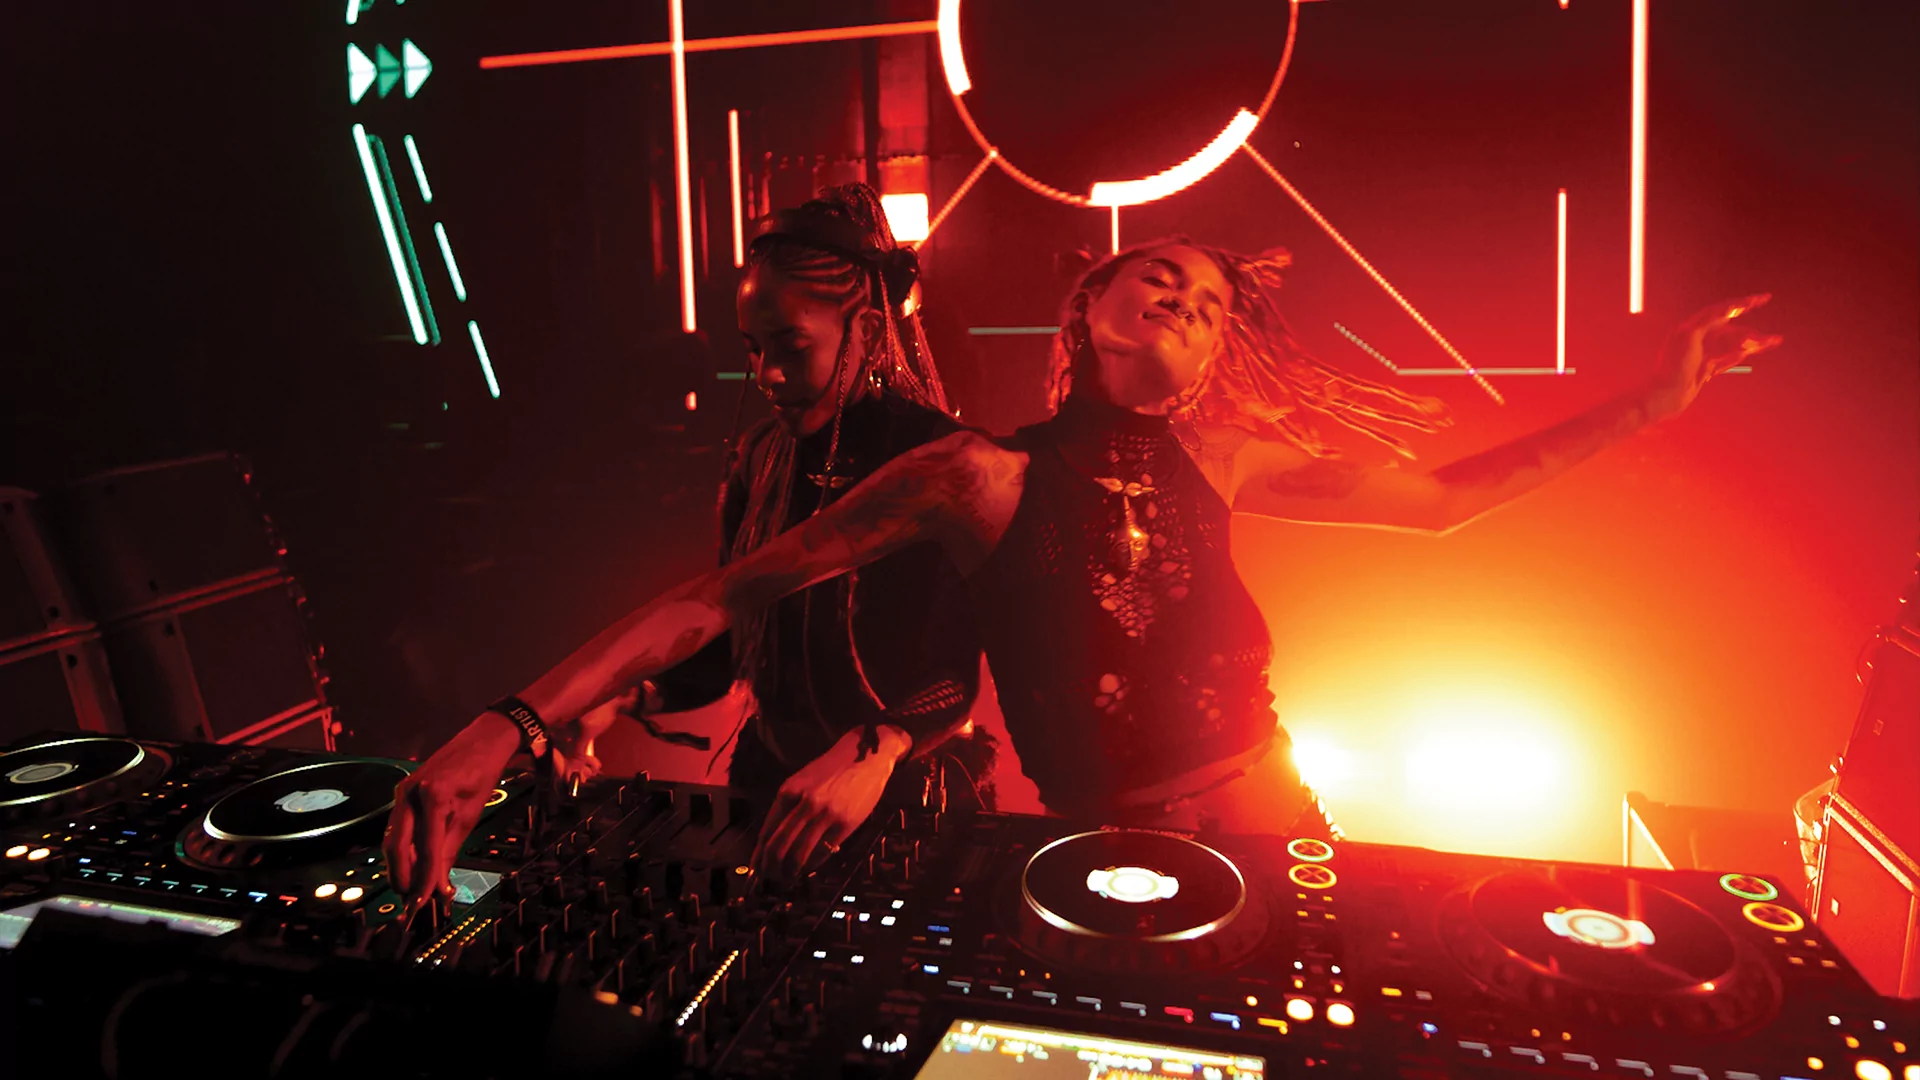 Photo of Coco & Breezy DJing behind the decks with orange and red lights